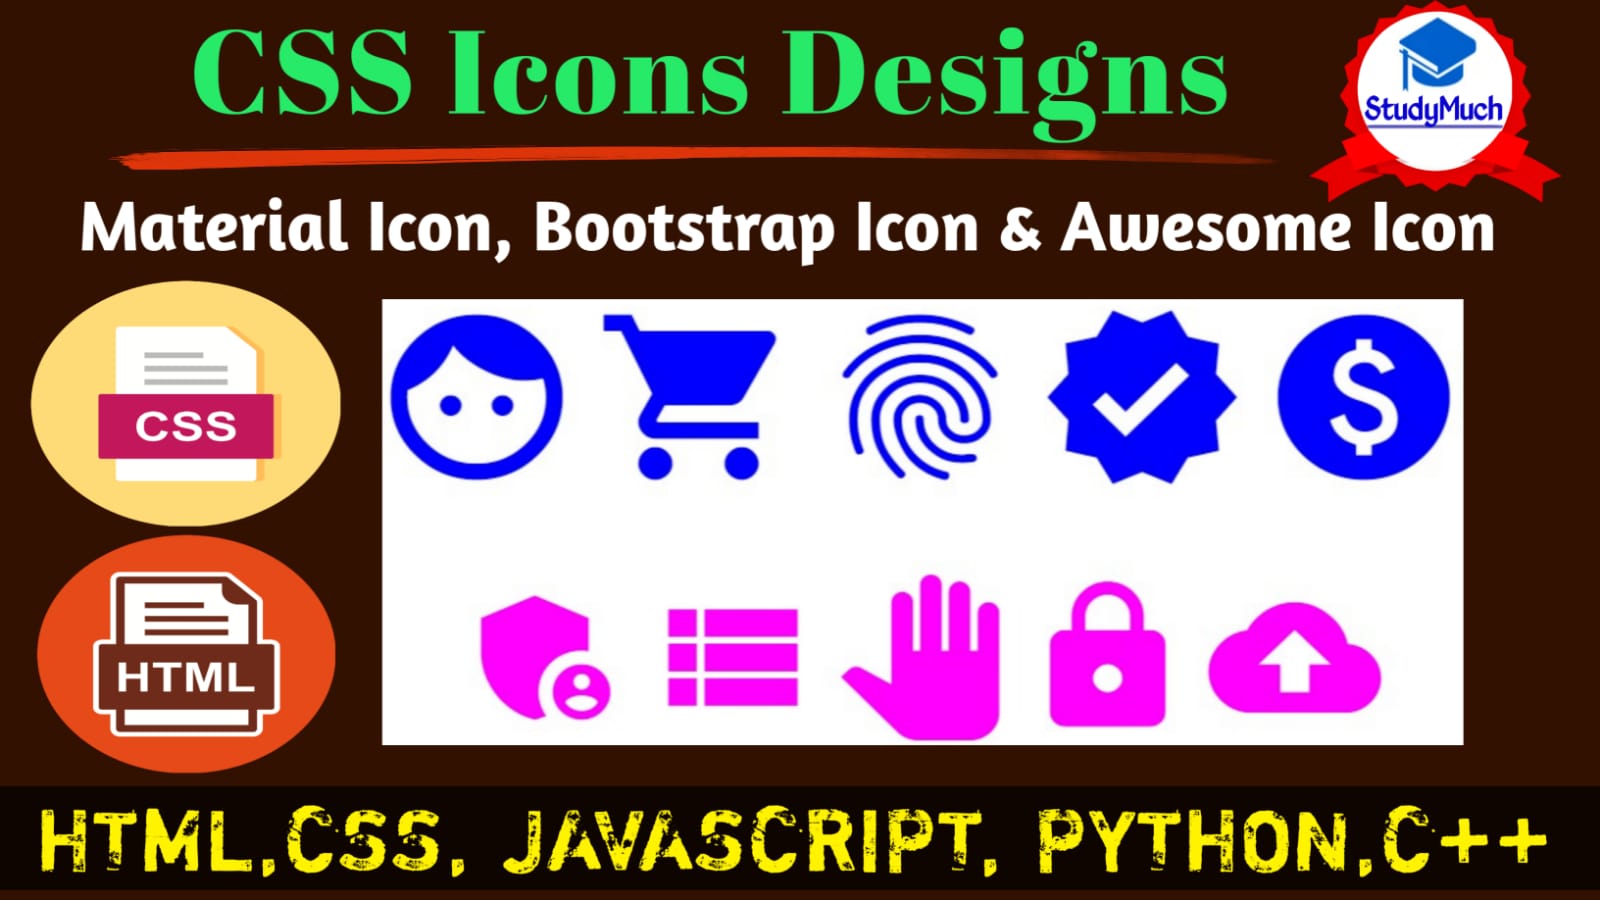 StudyMuch CSS Icons